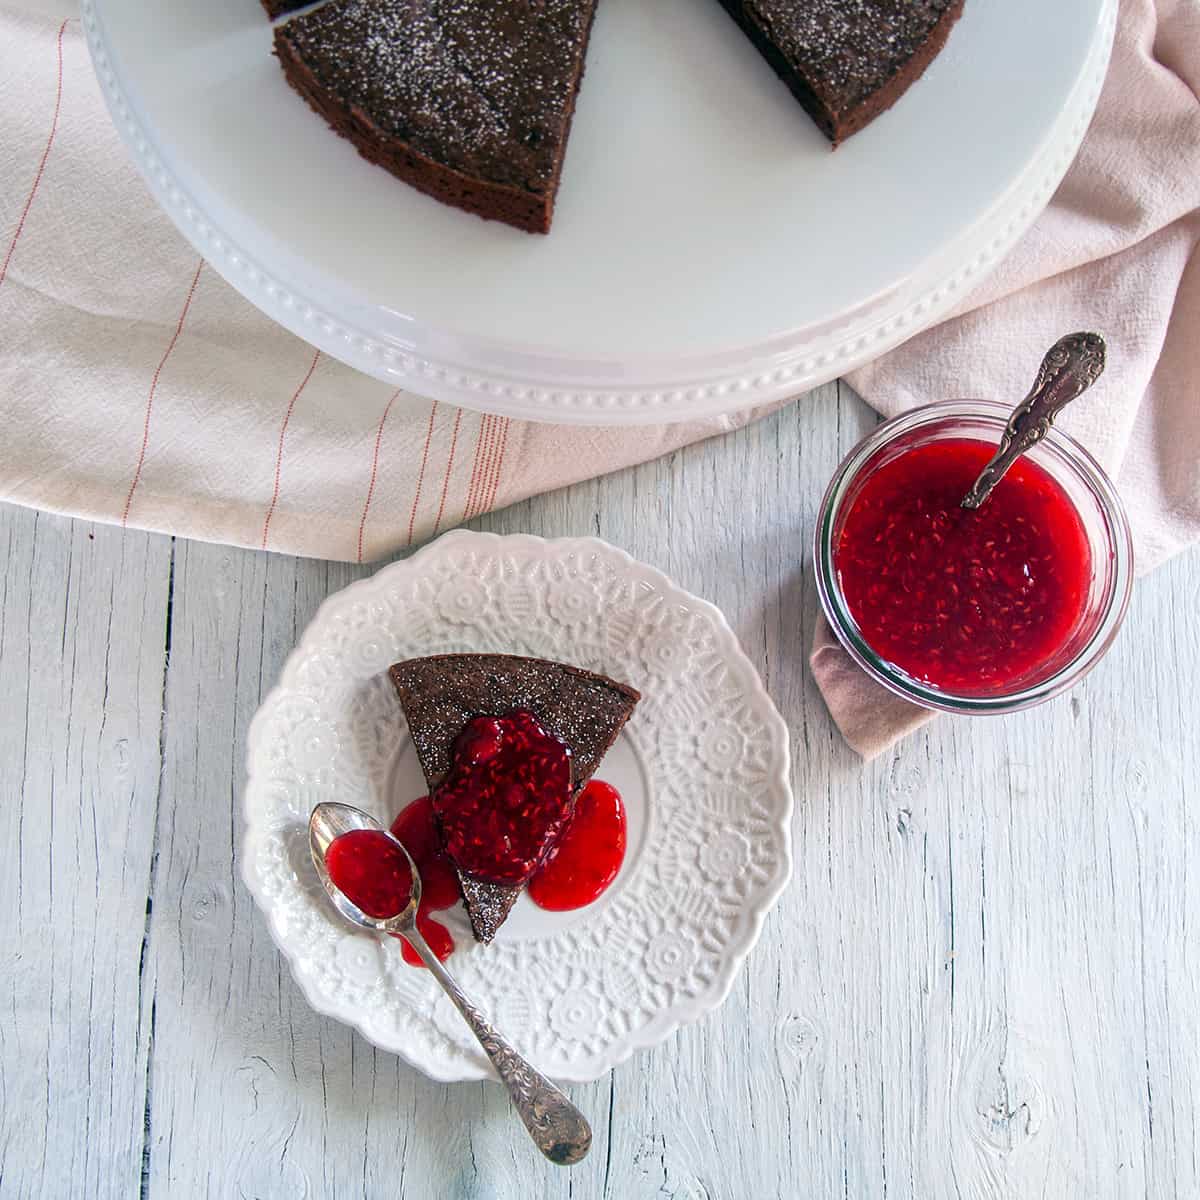 One slice of our Kladdkaka Swedish Sticky Cake on a white plate, covered in raspberry topping and a spoon to the side.